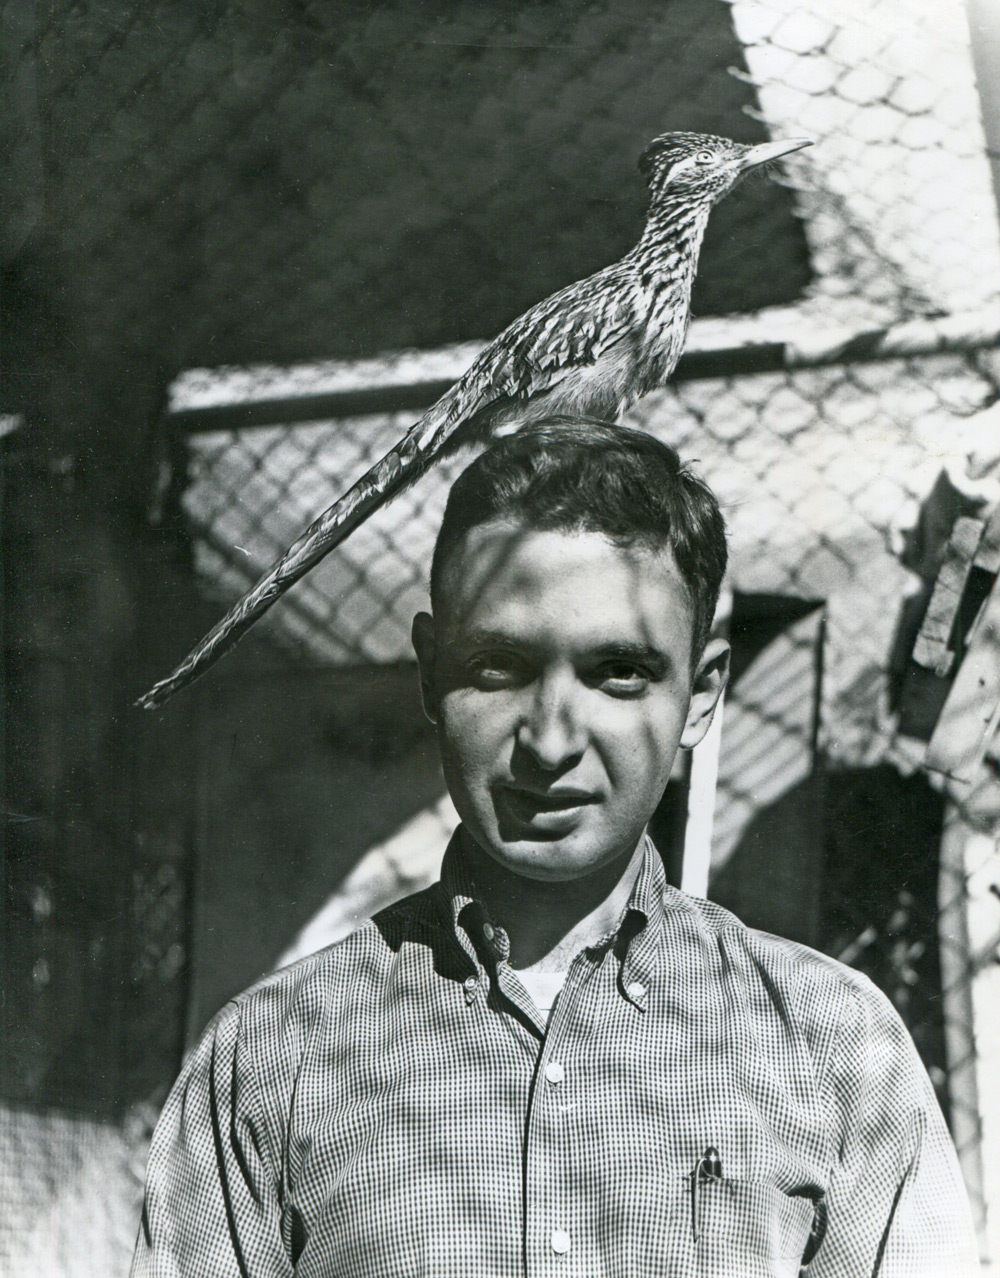 Steve Goldberg with roadrunner perched on his head.